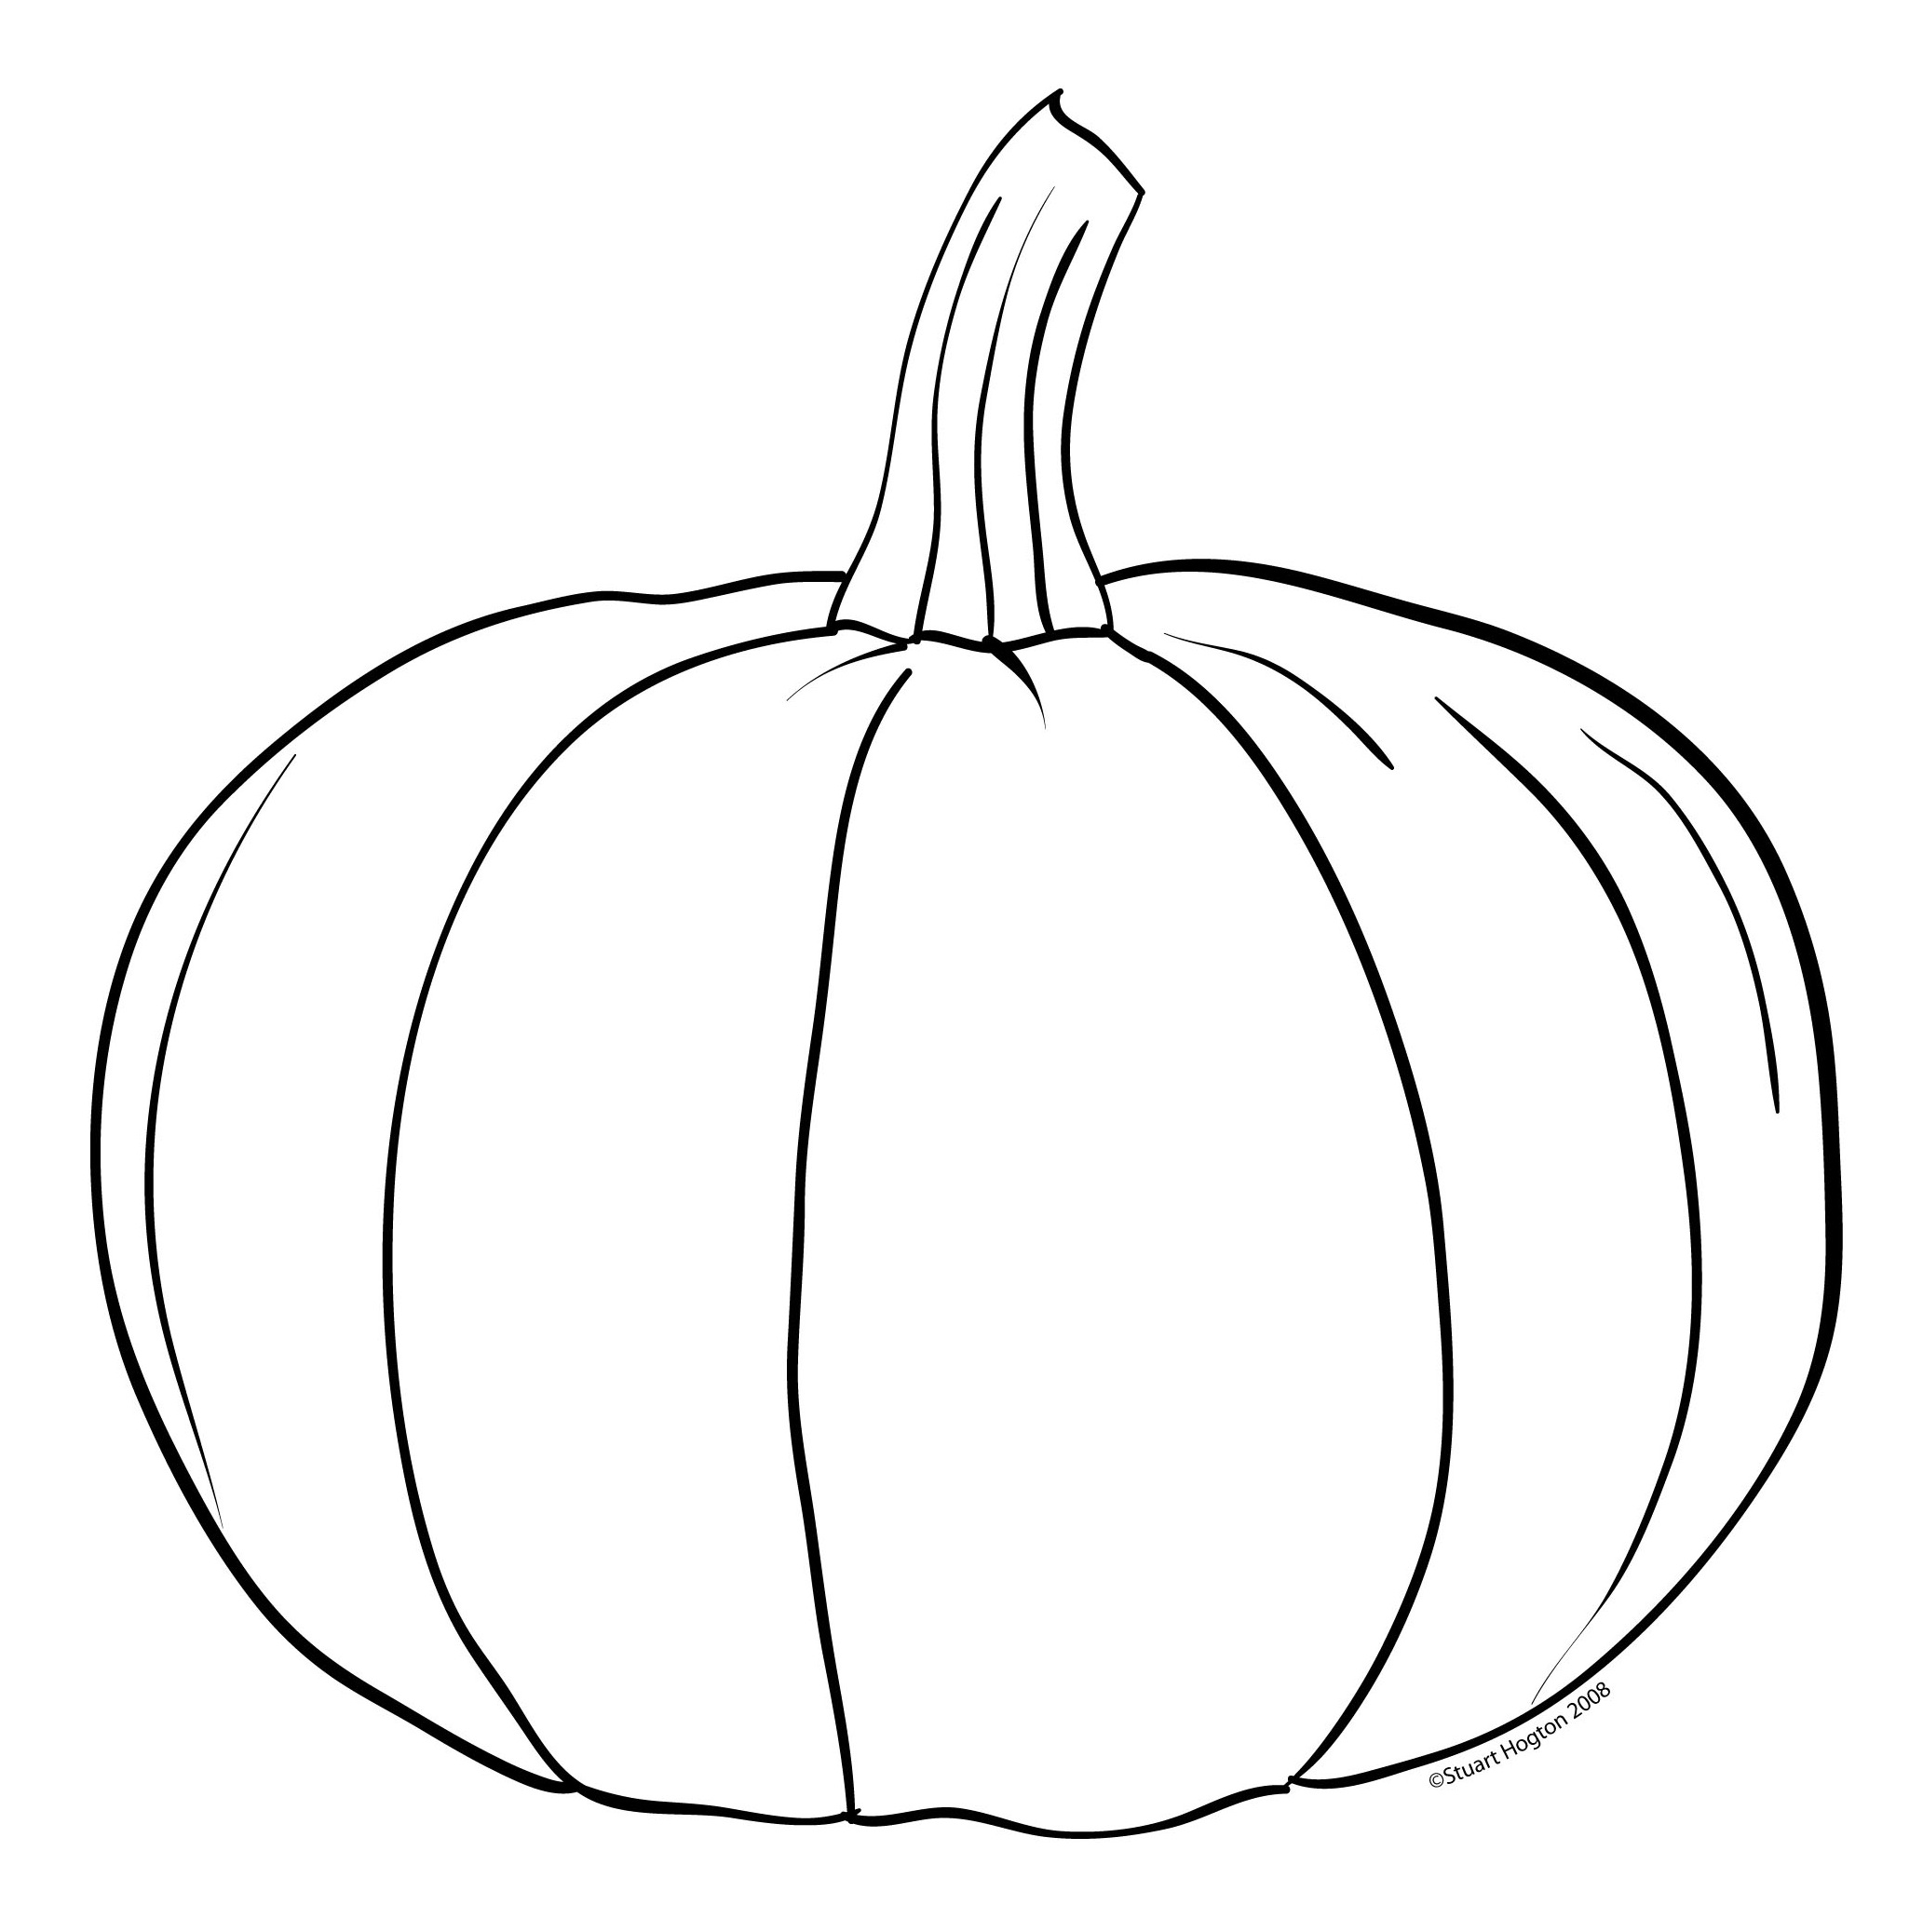 Pumpkin Coloring Template Coloring Pages For Adults Coloring Pumpkin